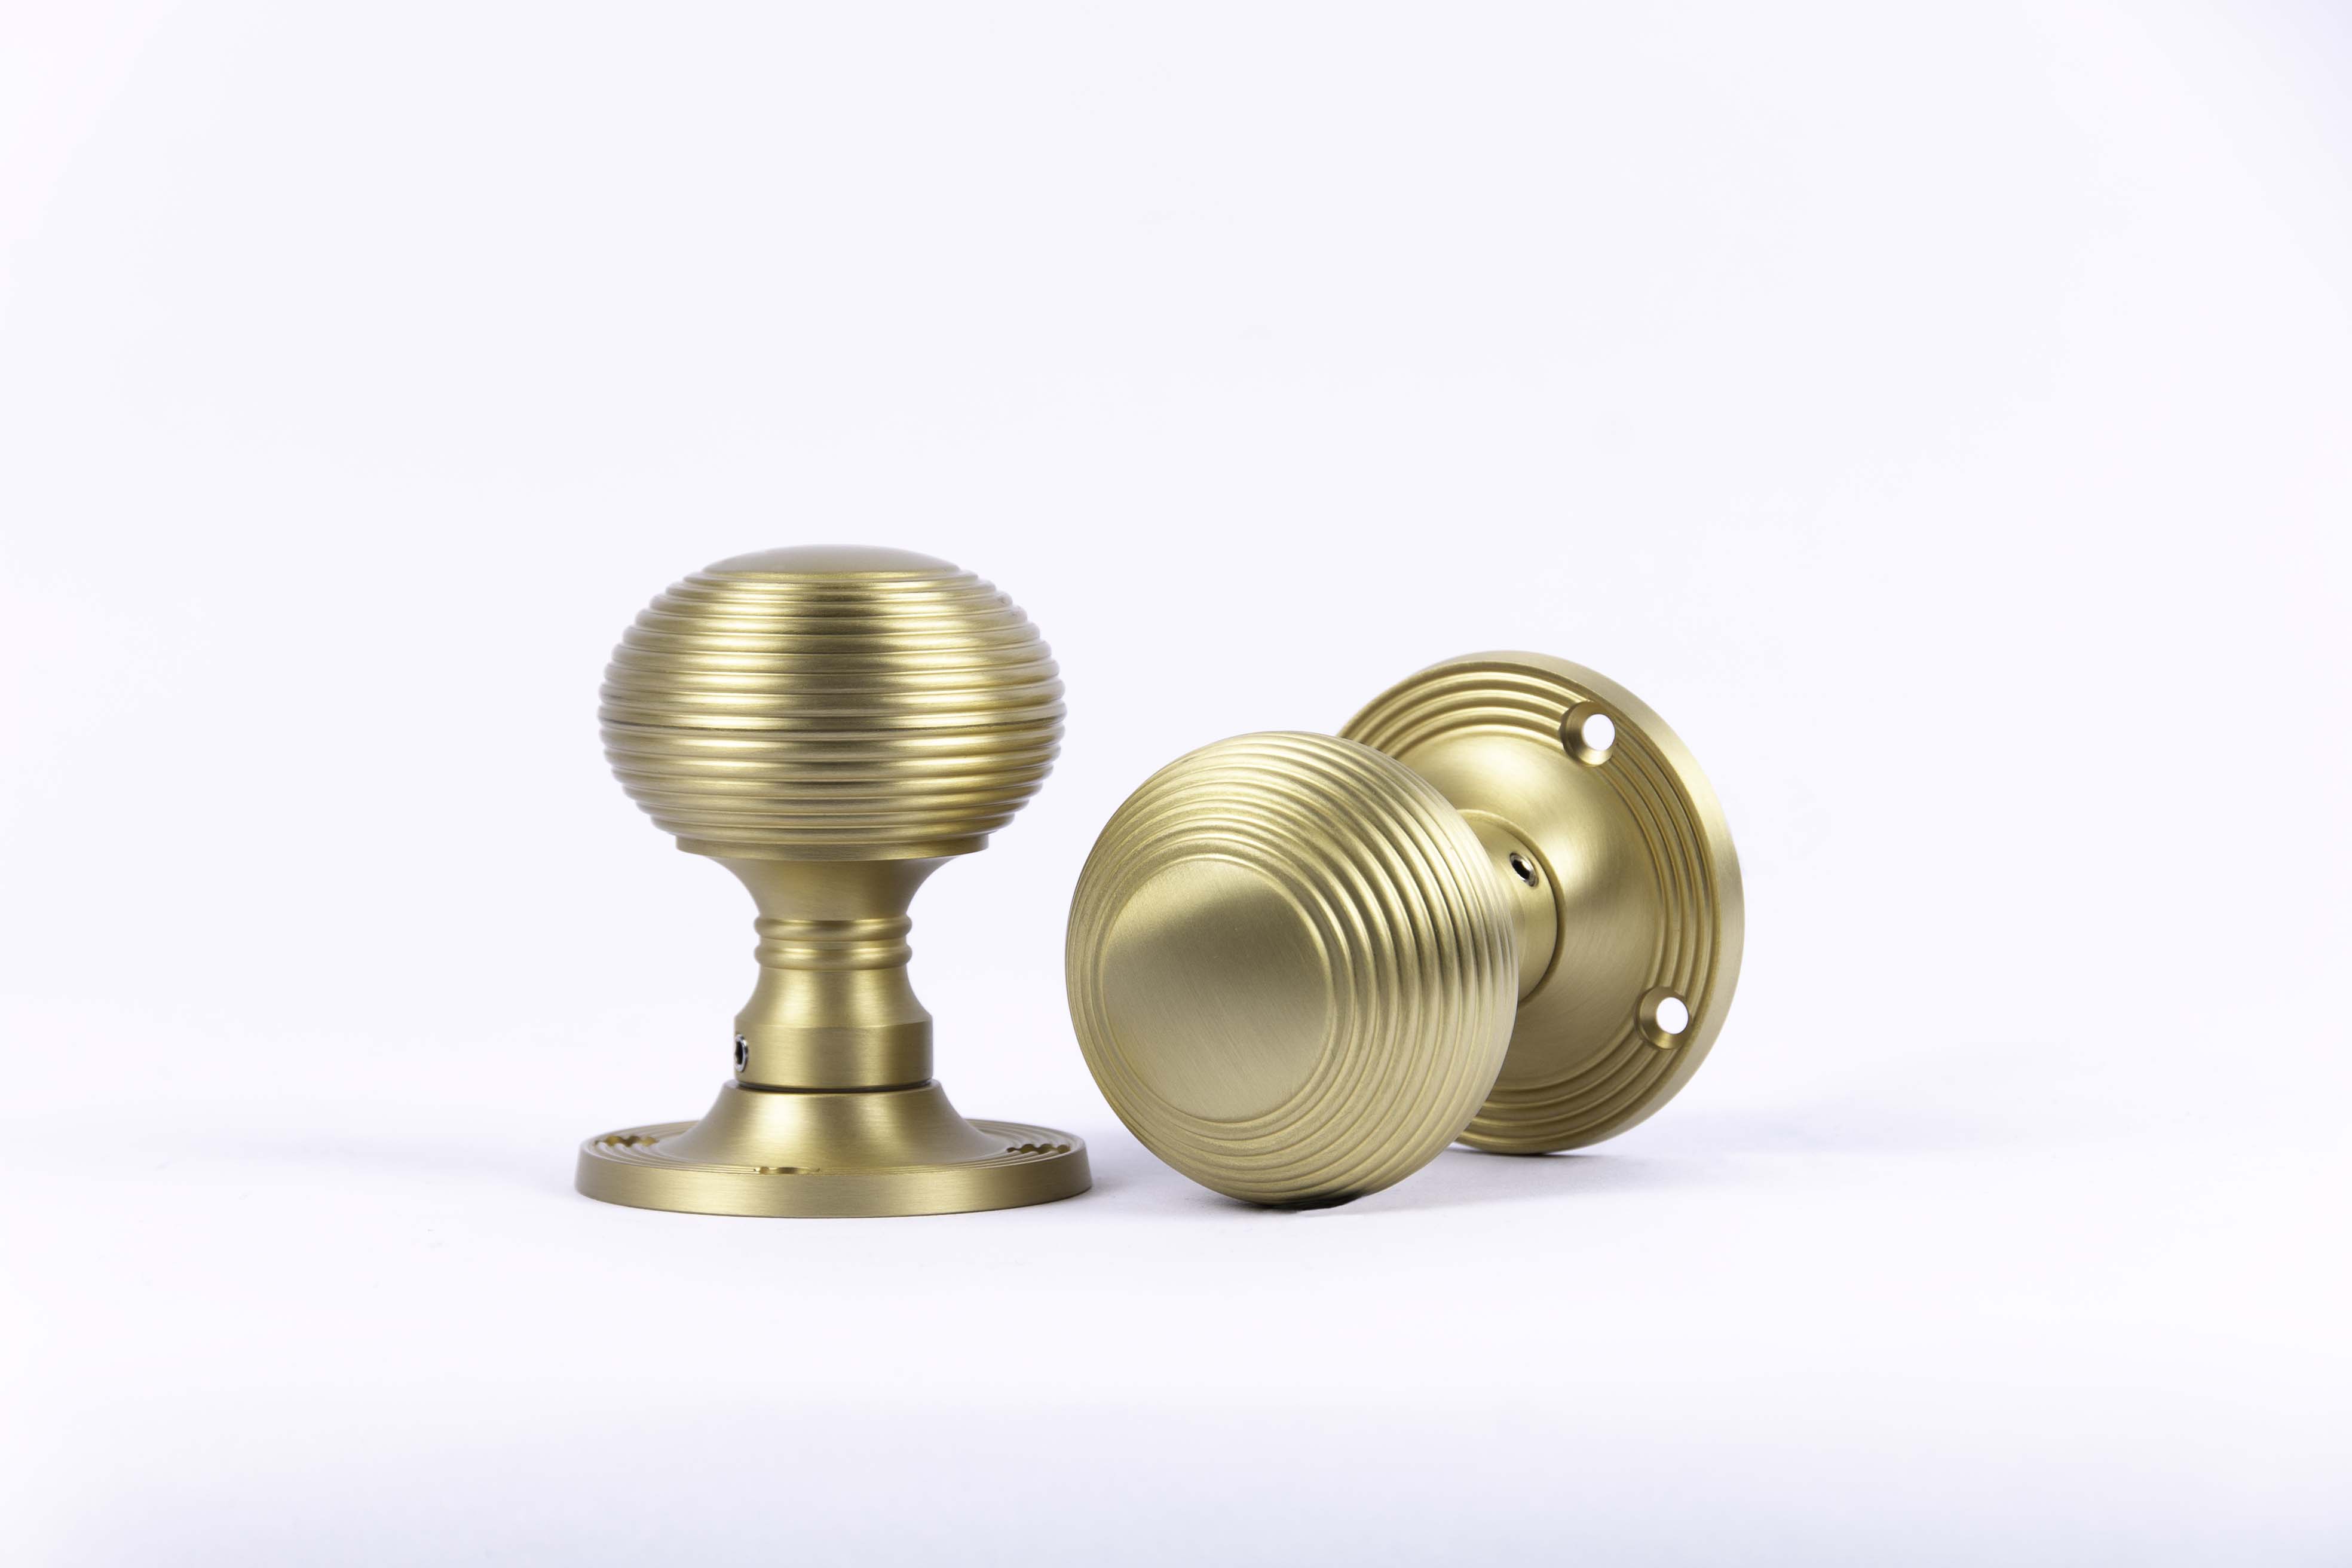 Rosewood & Polished Brass Beehive Mortice/Rim Knob Set by From the